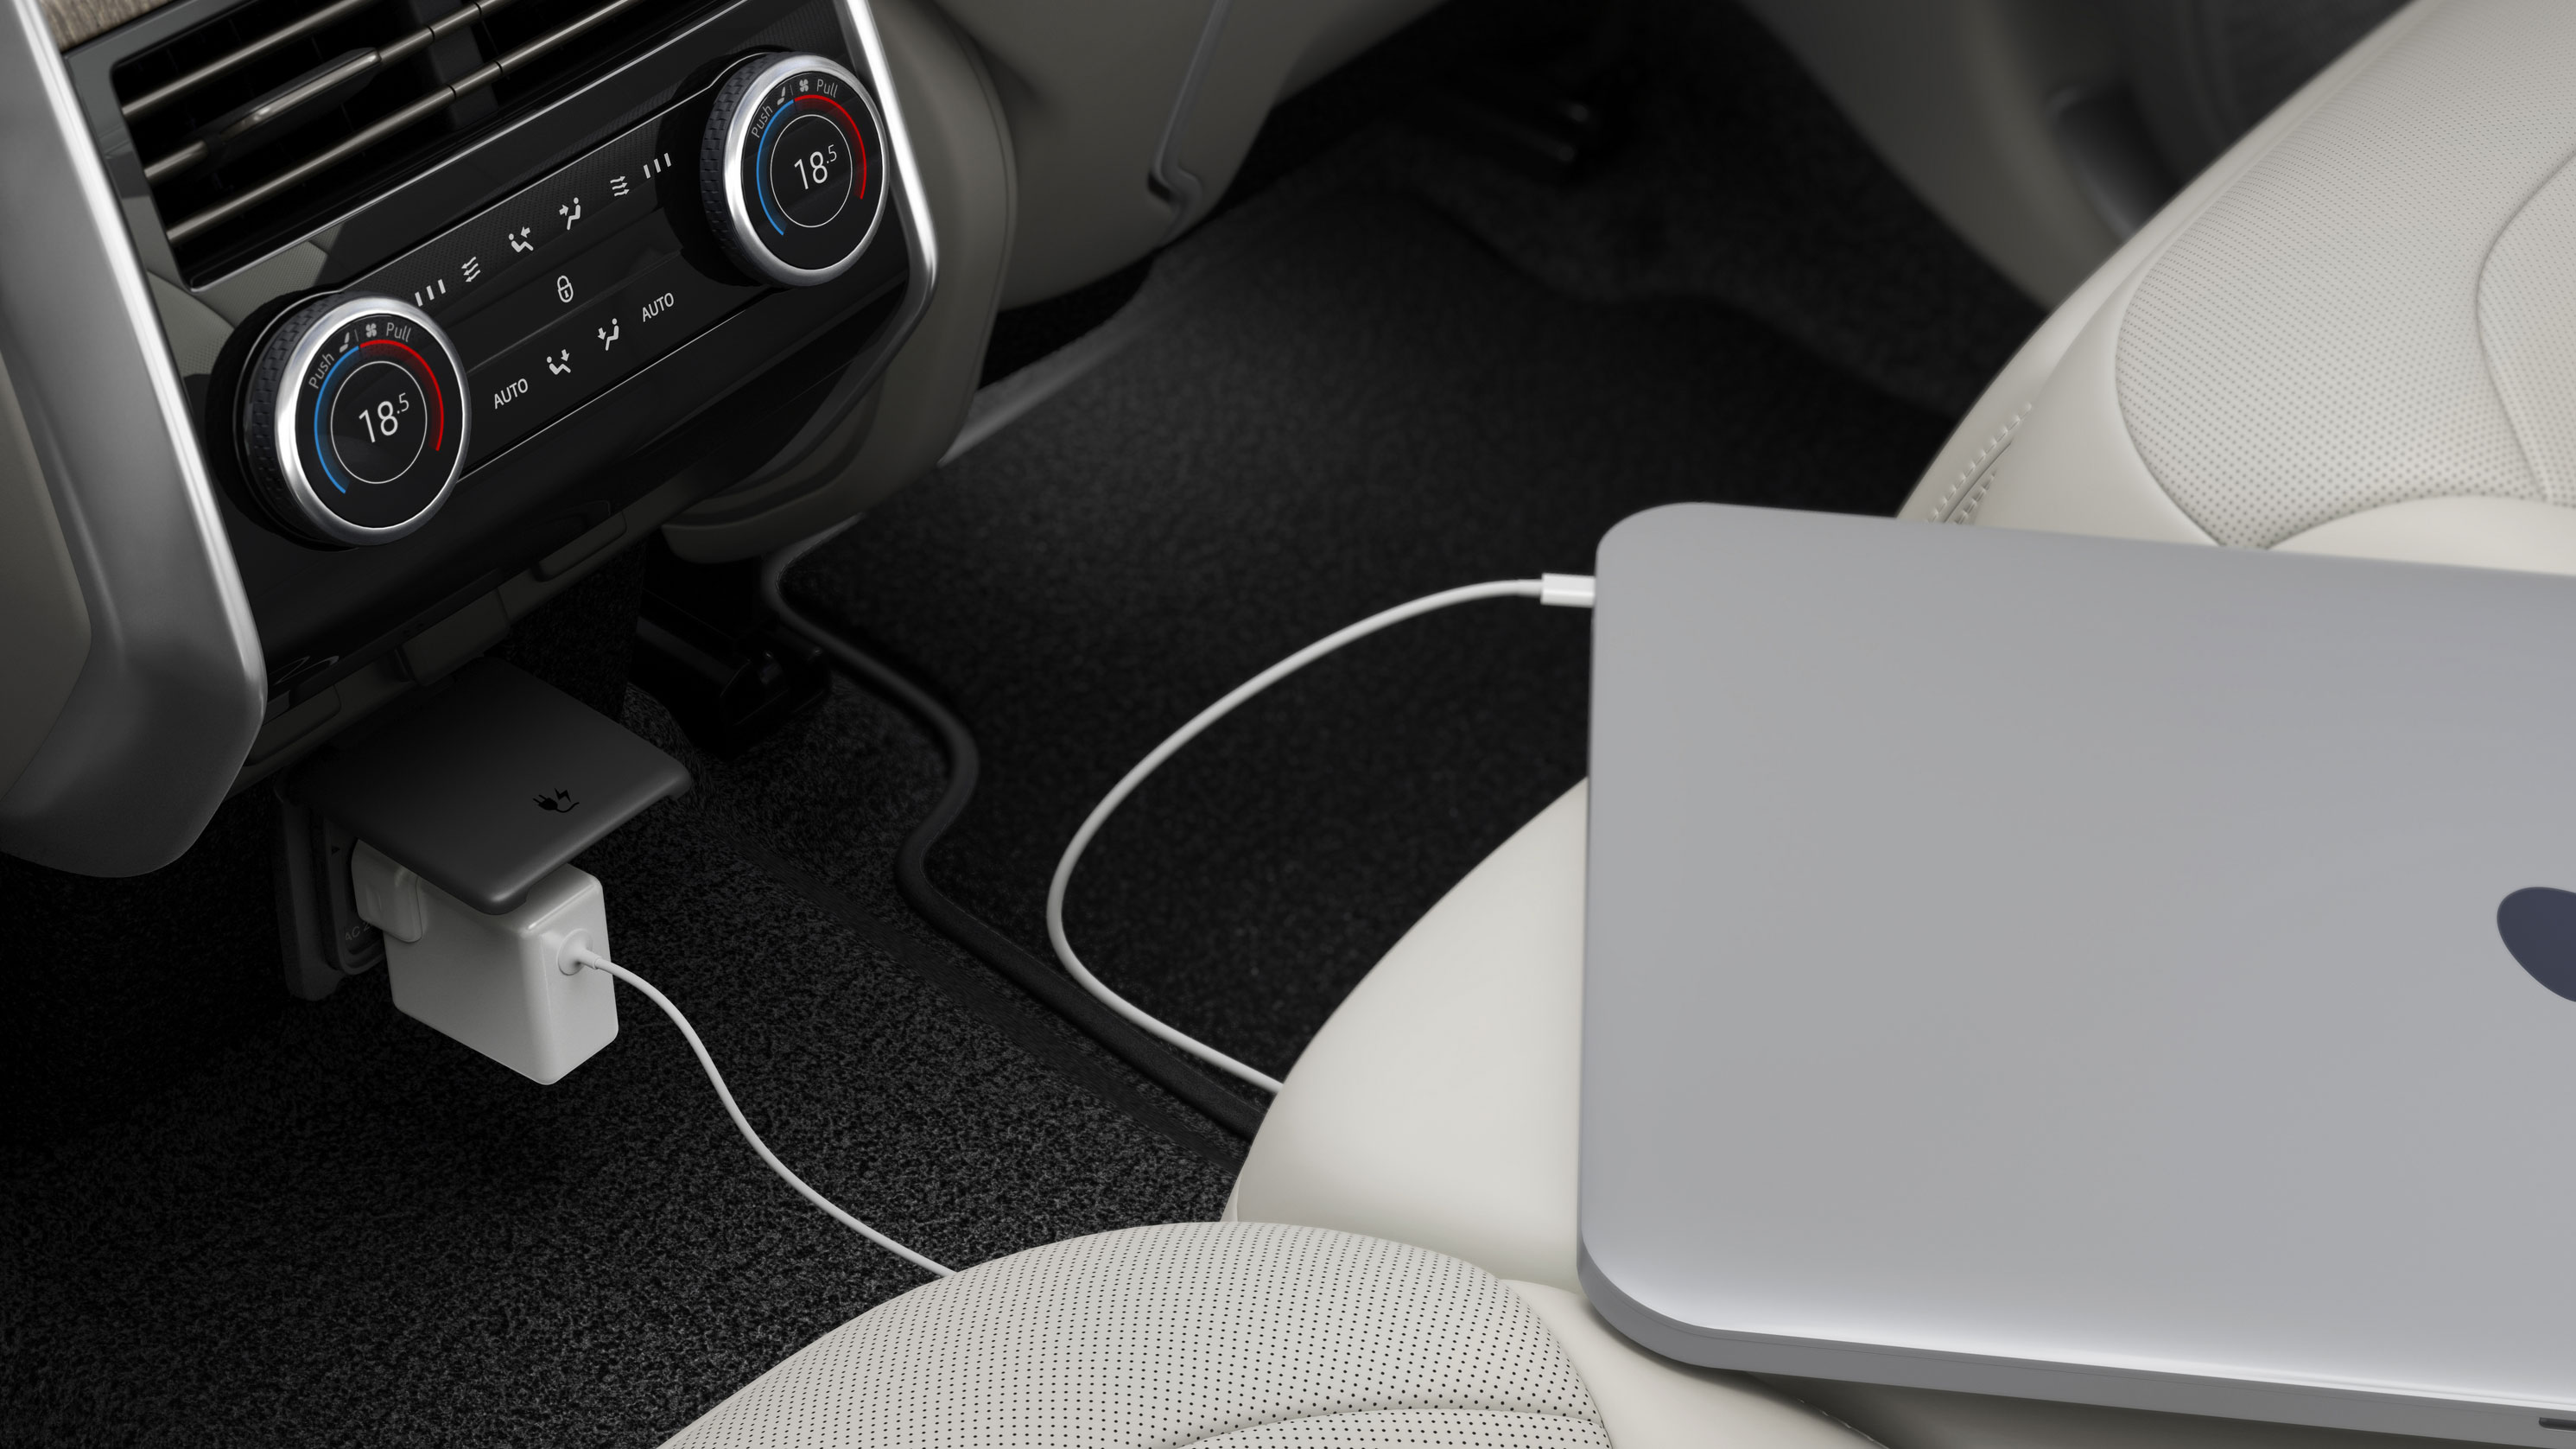 Laptop plugged into a full-size power outlet in a car